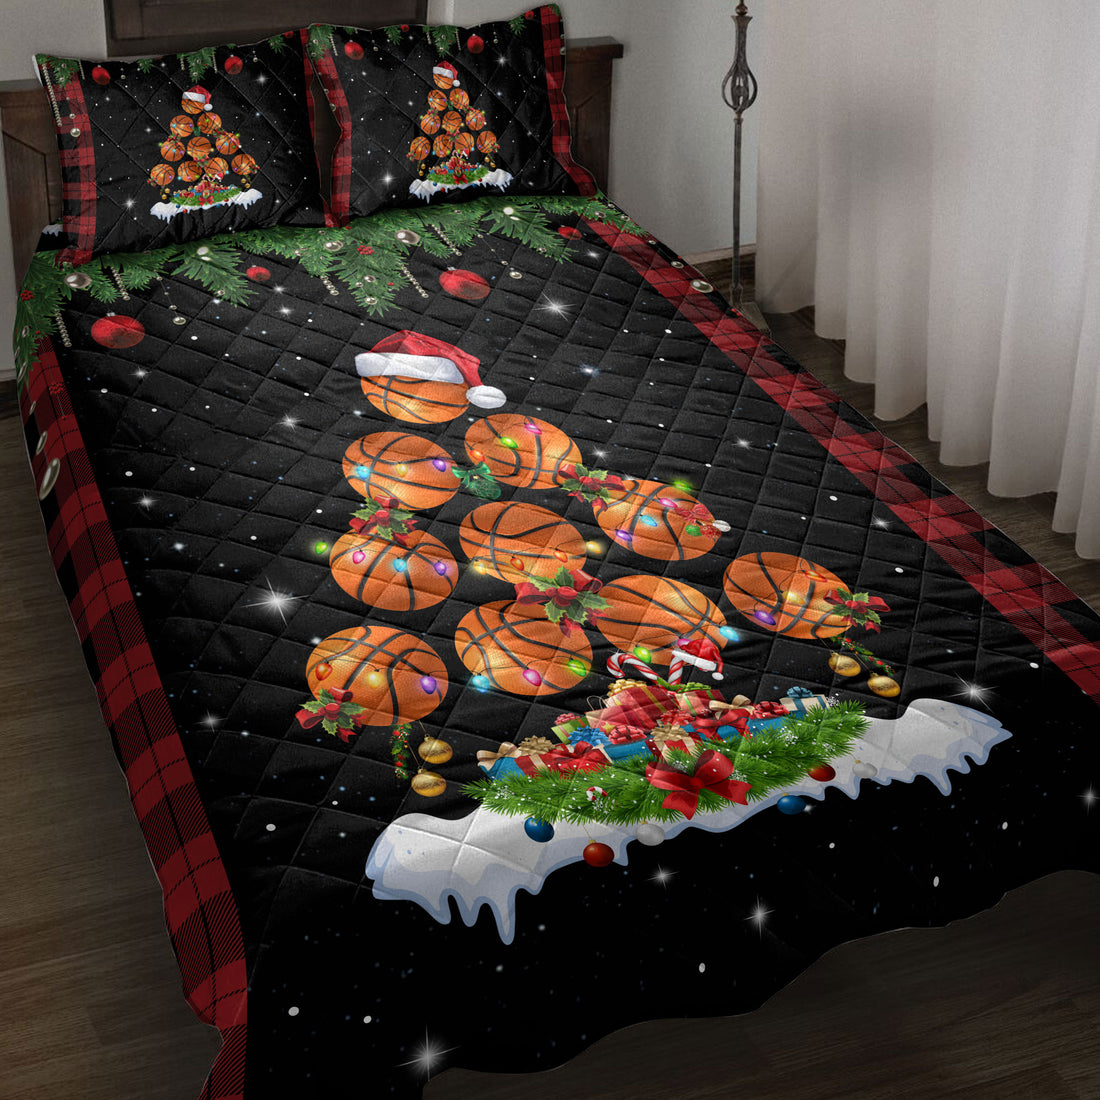 Ohaprints-Quilt-Bed-Set-Pillowcase-Basketball-Christmas-Tree-Snowflake-Gift-Box-Red-Buffalo-Plaid-Gifts-Blanket-Bedspread-Bedding-3802-Throw (55'' x 60'')